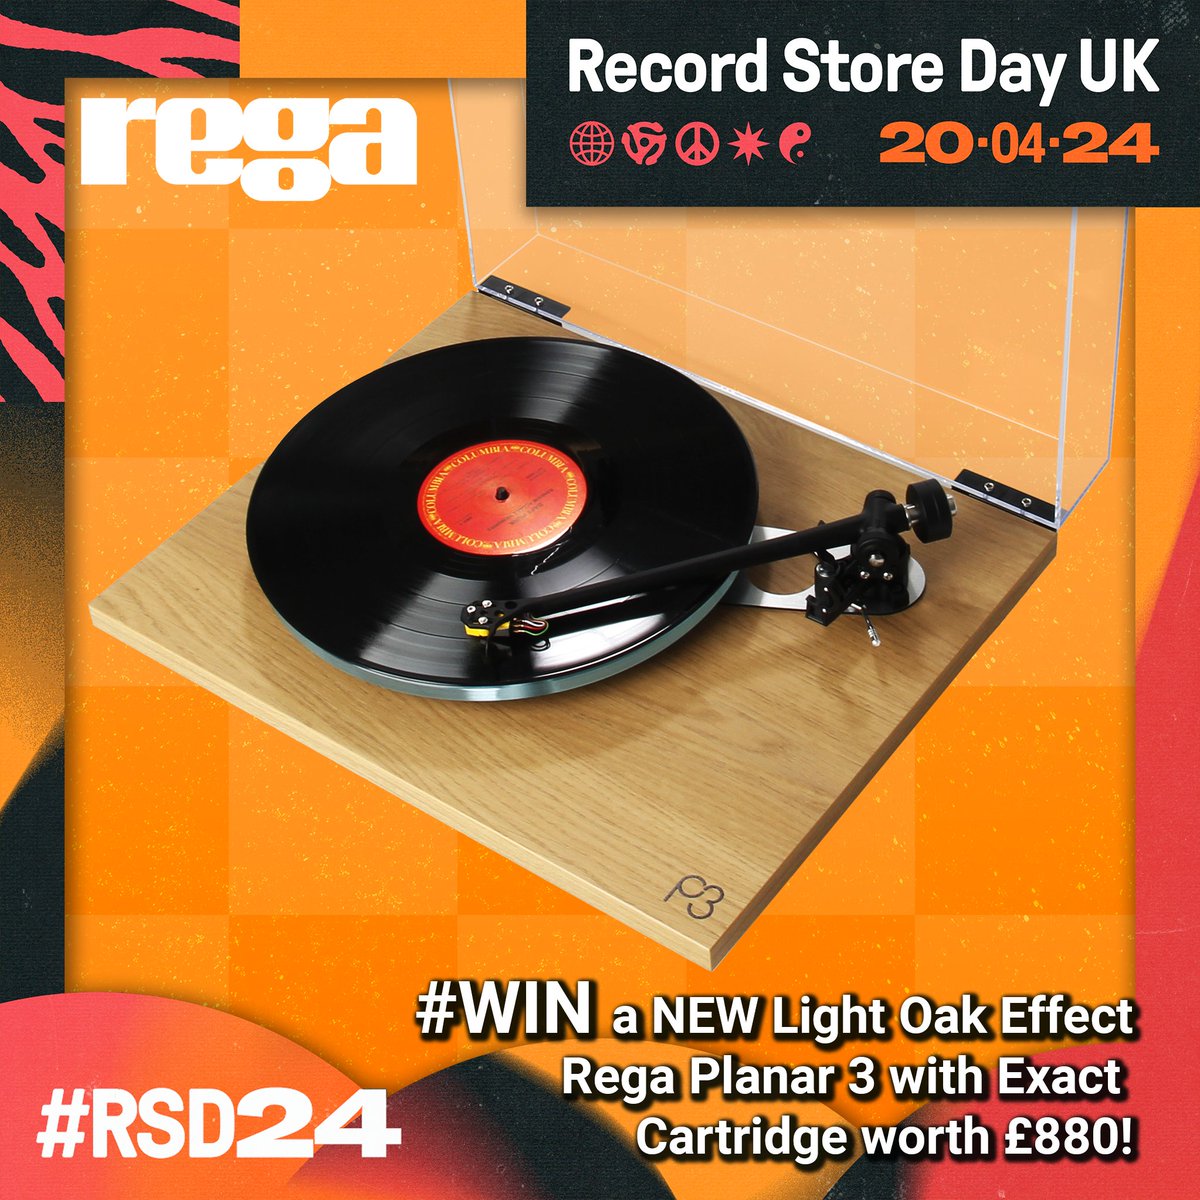 🎉LIKE AND RETWEET TO #WIN A #REGA TURNTABLE WORTH £880🎉 To celebrate @RSDUK 2024, we are giving away a brand new Rega Planar 3 in the NEW Light Oak Effect fitted with a Rega Exact cartridge. Find out more about this amazing prize here: rb.gy/8kxbgh The lucky winner…